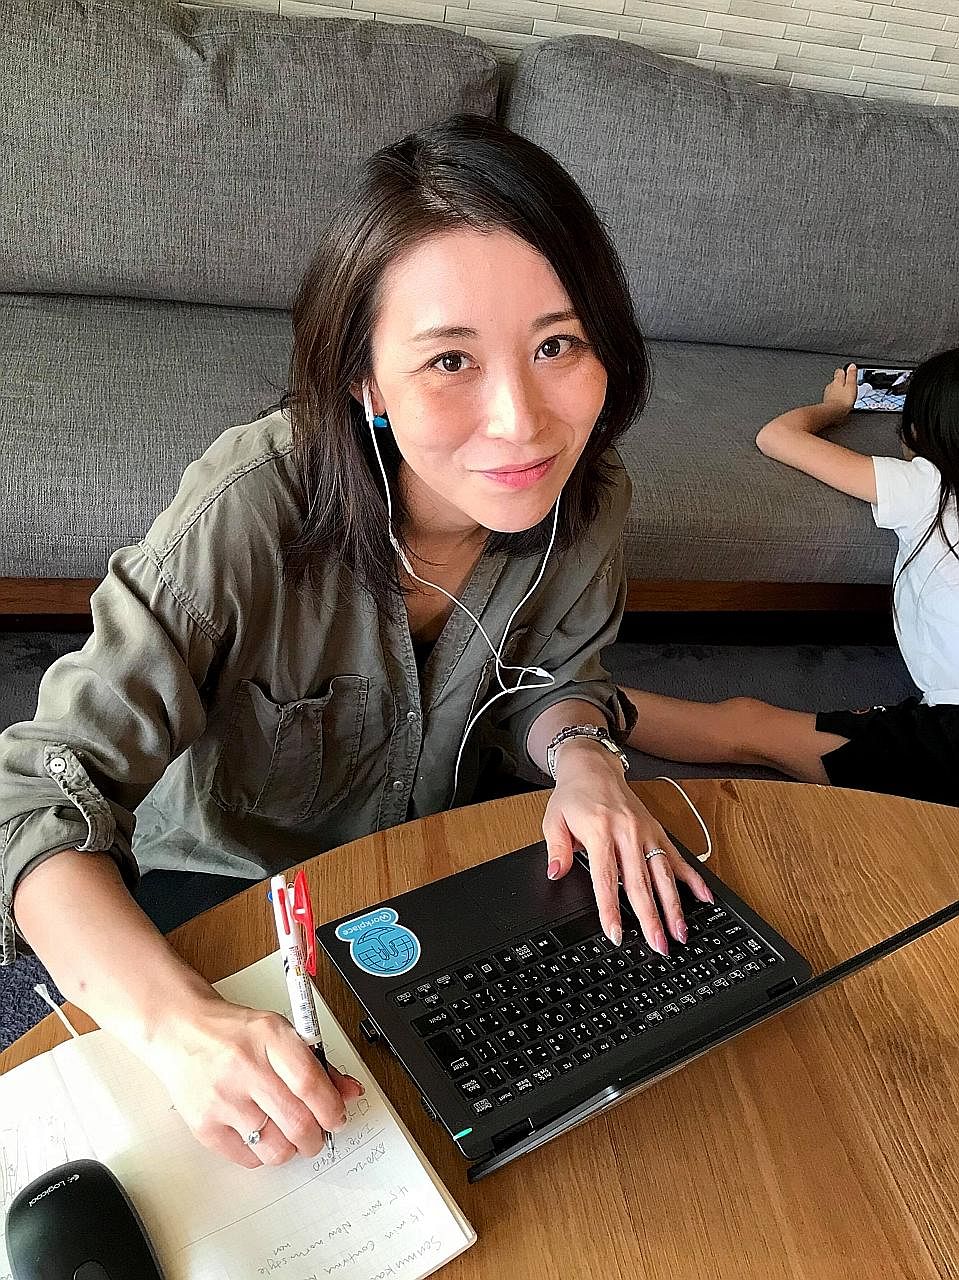 Ms Yayoi Yakumo says she relishes being able to spend more time with her family while working from home, though "it has taken some getting used to in order to keep my work and personal lives separate". 